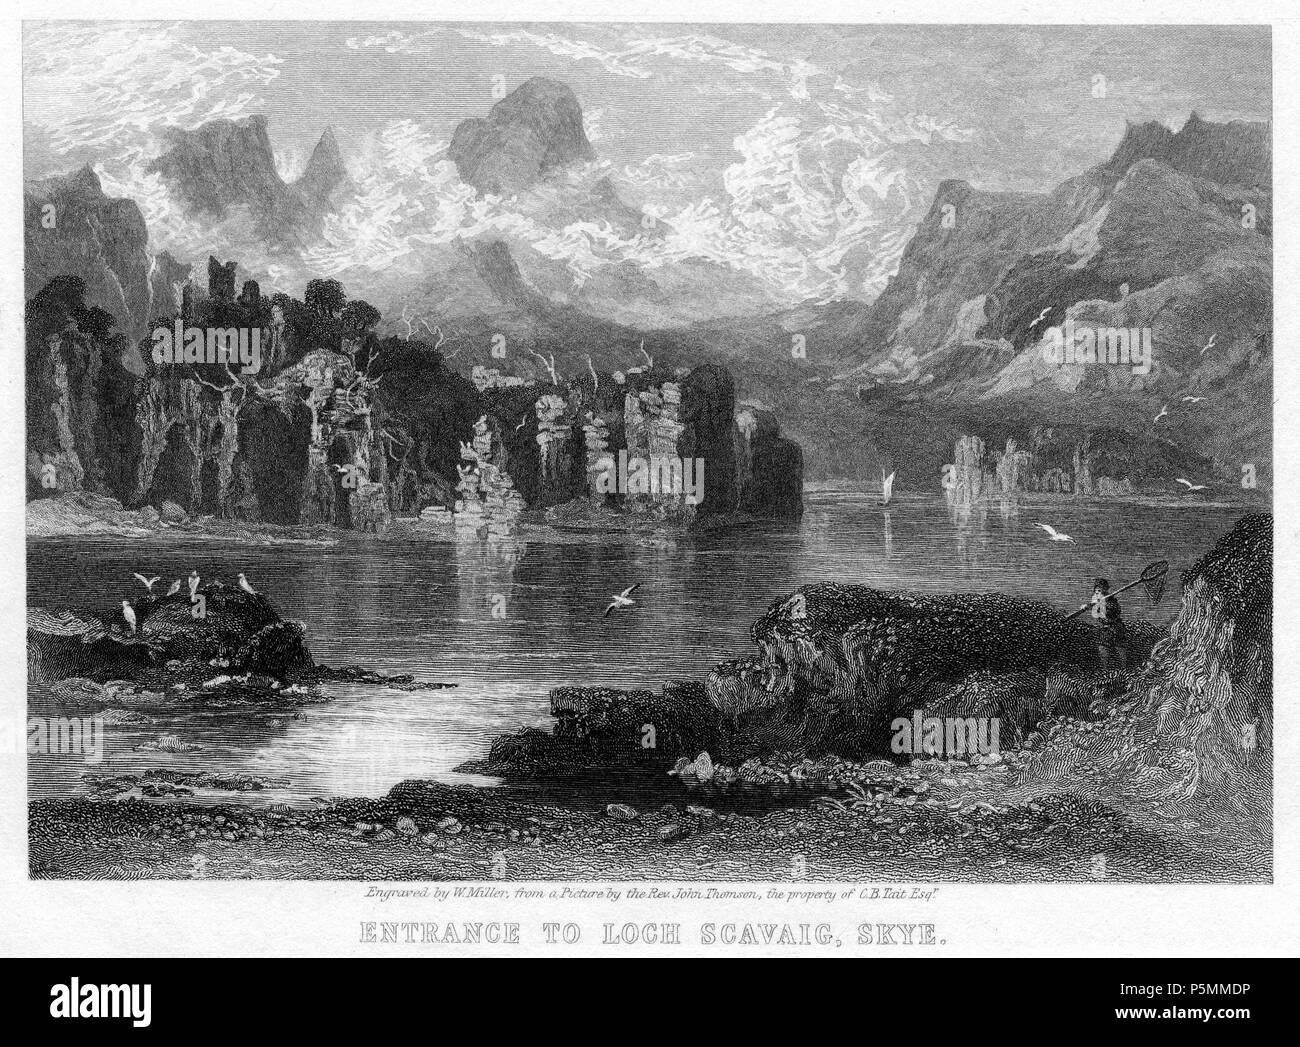 N/A. Entrance to Loch Skavaig, Skye engraving by William Miller after Rev john Thomson, published in Black's Picturesque Tourist of Scotland with an Accurate Travelling Map, Engraved Charts, and Views of the Scenery; Plans of Edinburgh and Glasgow; and a Copious Itinerary. Adam & Charles Black, Edinburgh; various editions from 1846 . 1846.   William Miller  (1796–1882)     Alternative names William Frederick I Miller; William Frederick, I Miller  Description Scottish engraver  Date of birth/death 28 May 1796 20 January 1882  Location of birth/death Edinburgh Sheffield  Authority control  : Q25 Stock Photo